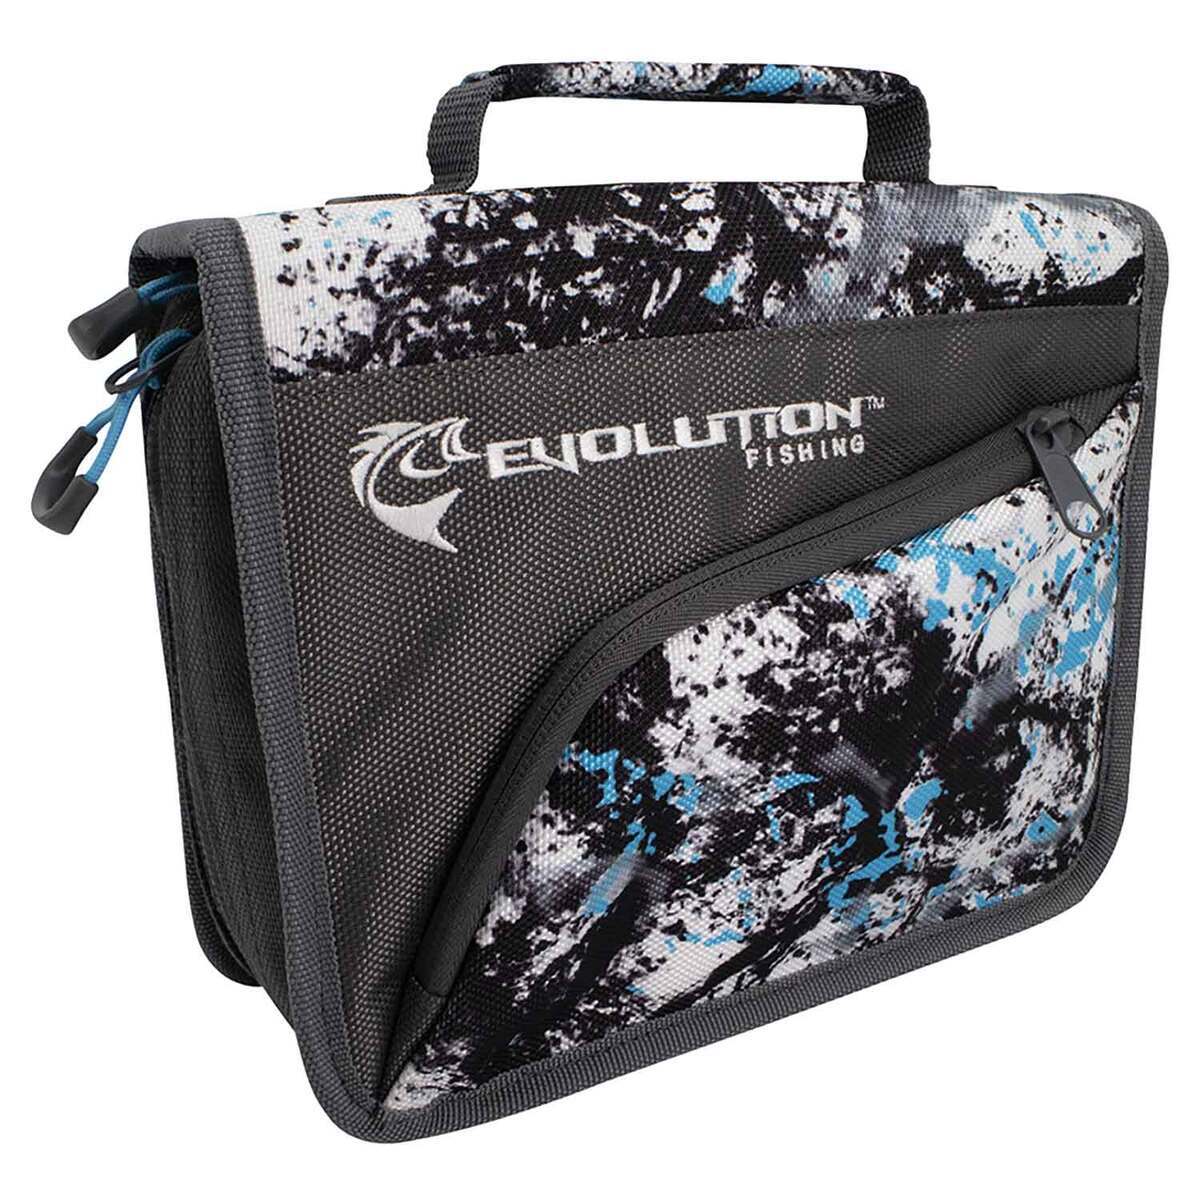 Evolution Fishing Tackle Boxes